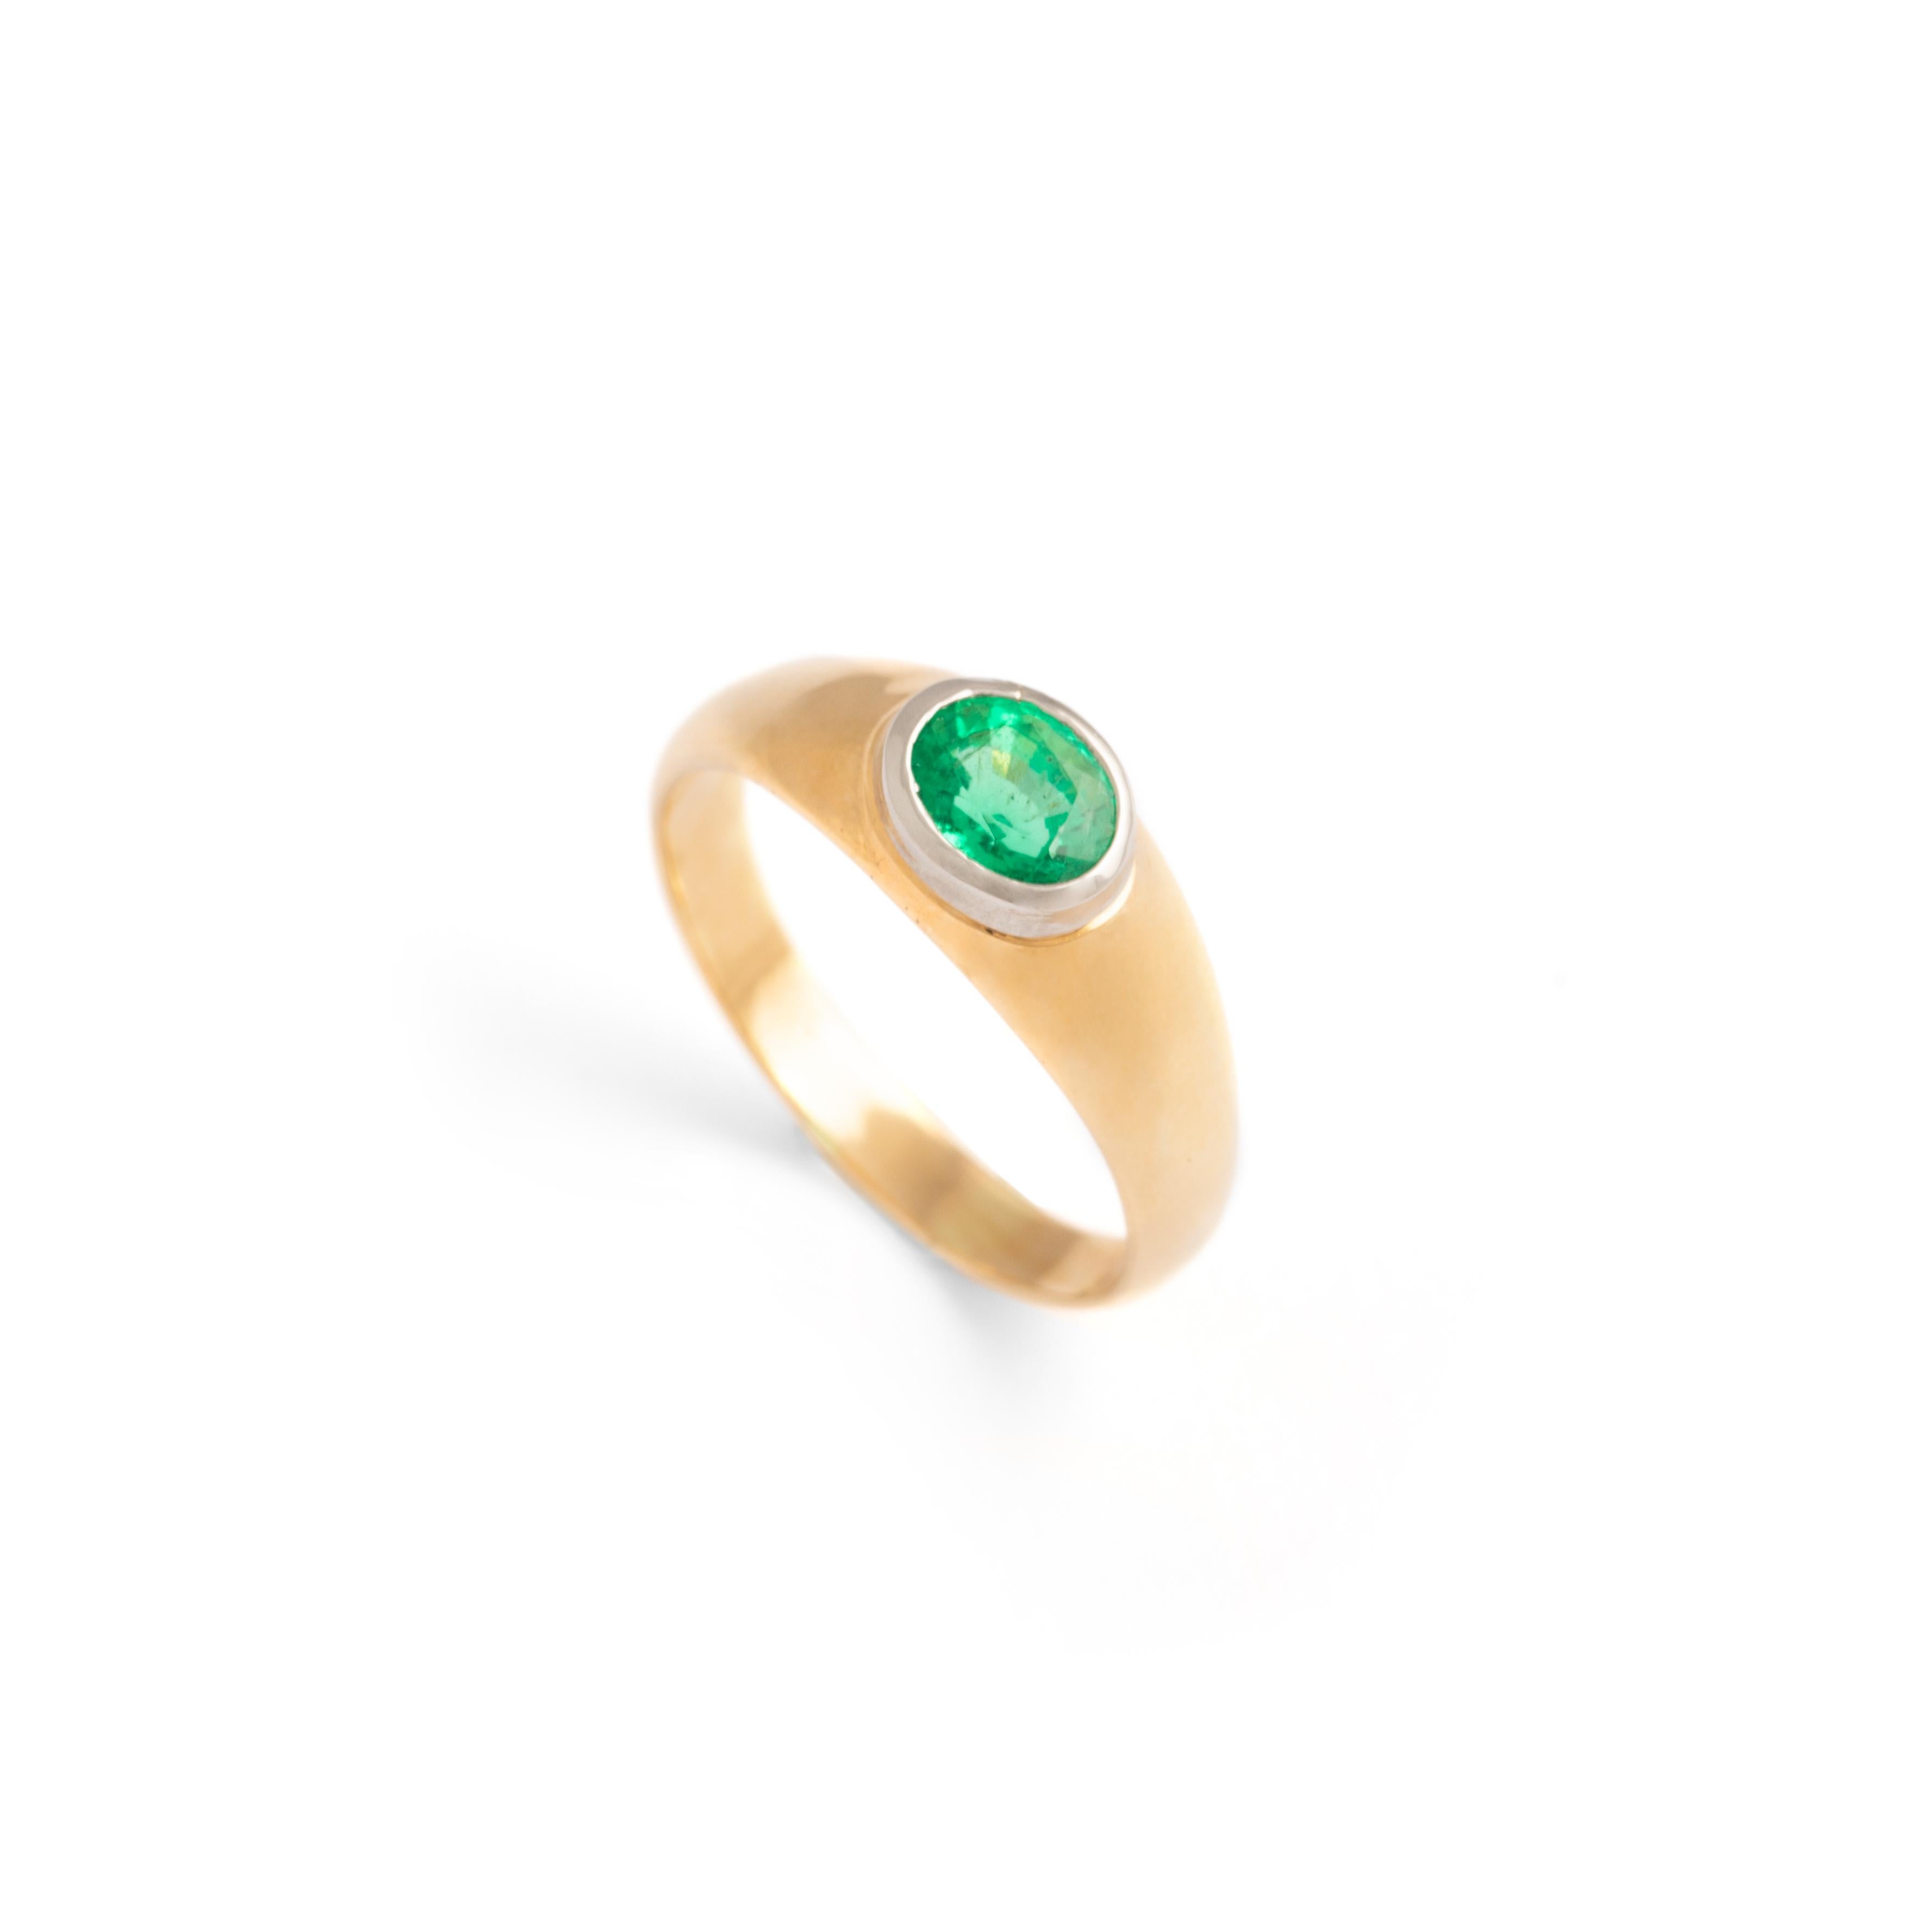 Brillant Emerald 1.40 carat mounted on 6.45 gr. yellow gold ring.
Swiss certificate.

Weight: 6.65 grams.
Size: 68.